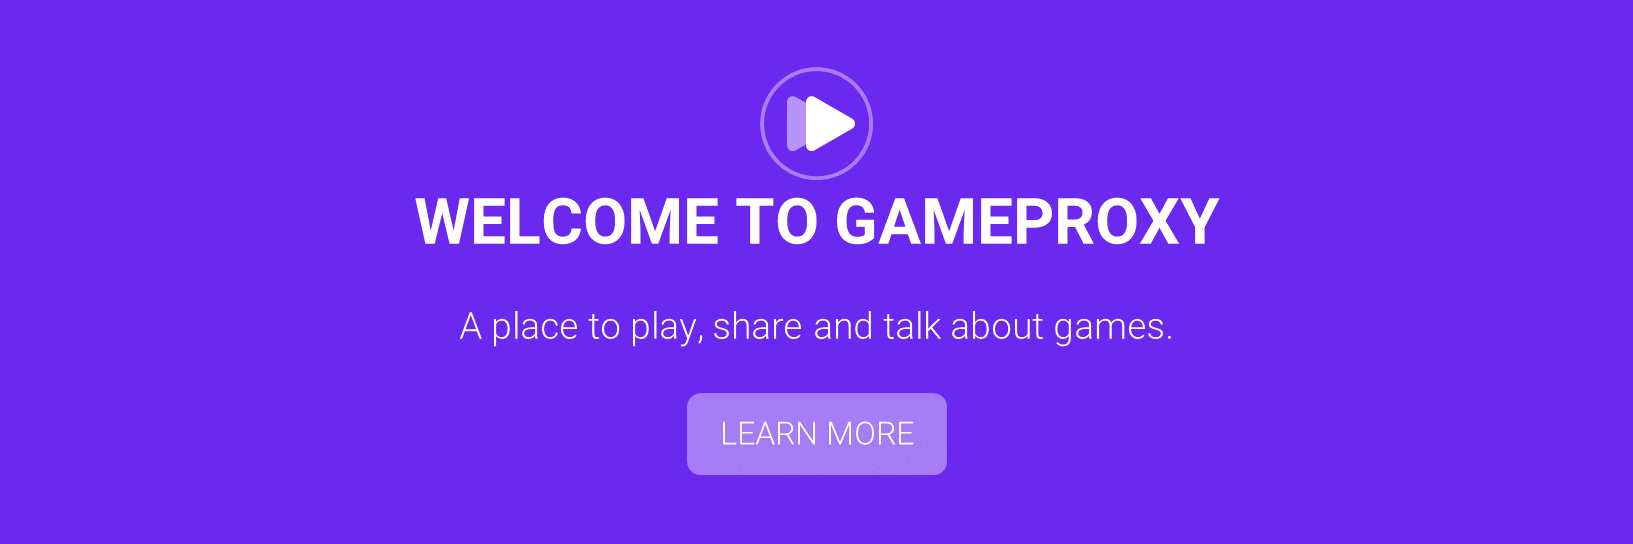 Welcome to GameProxy.